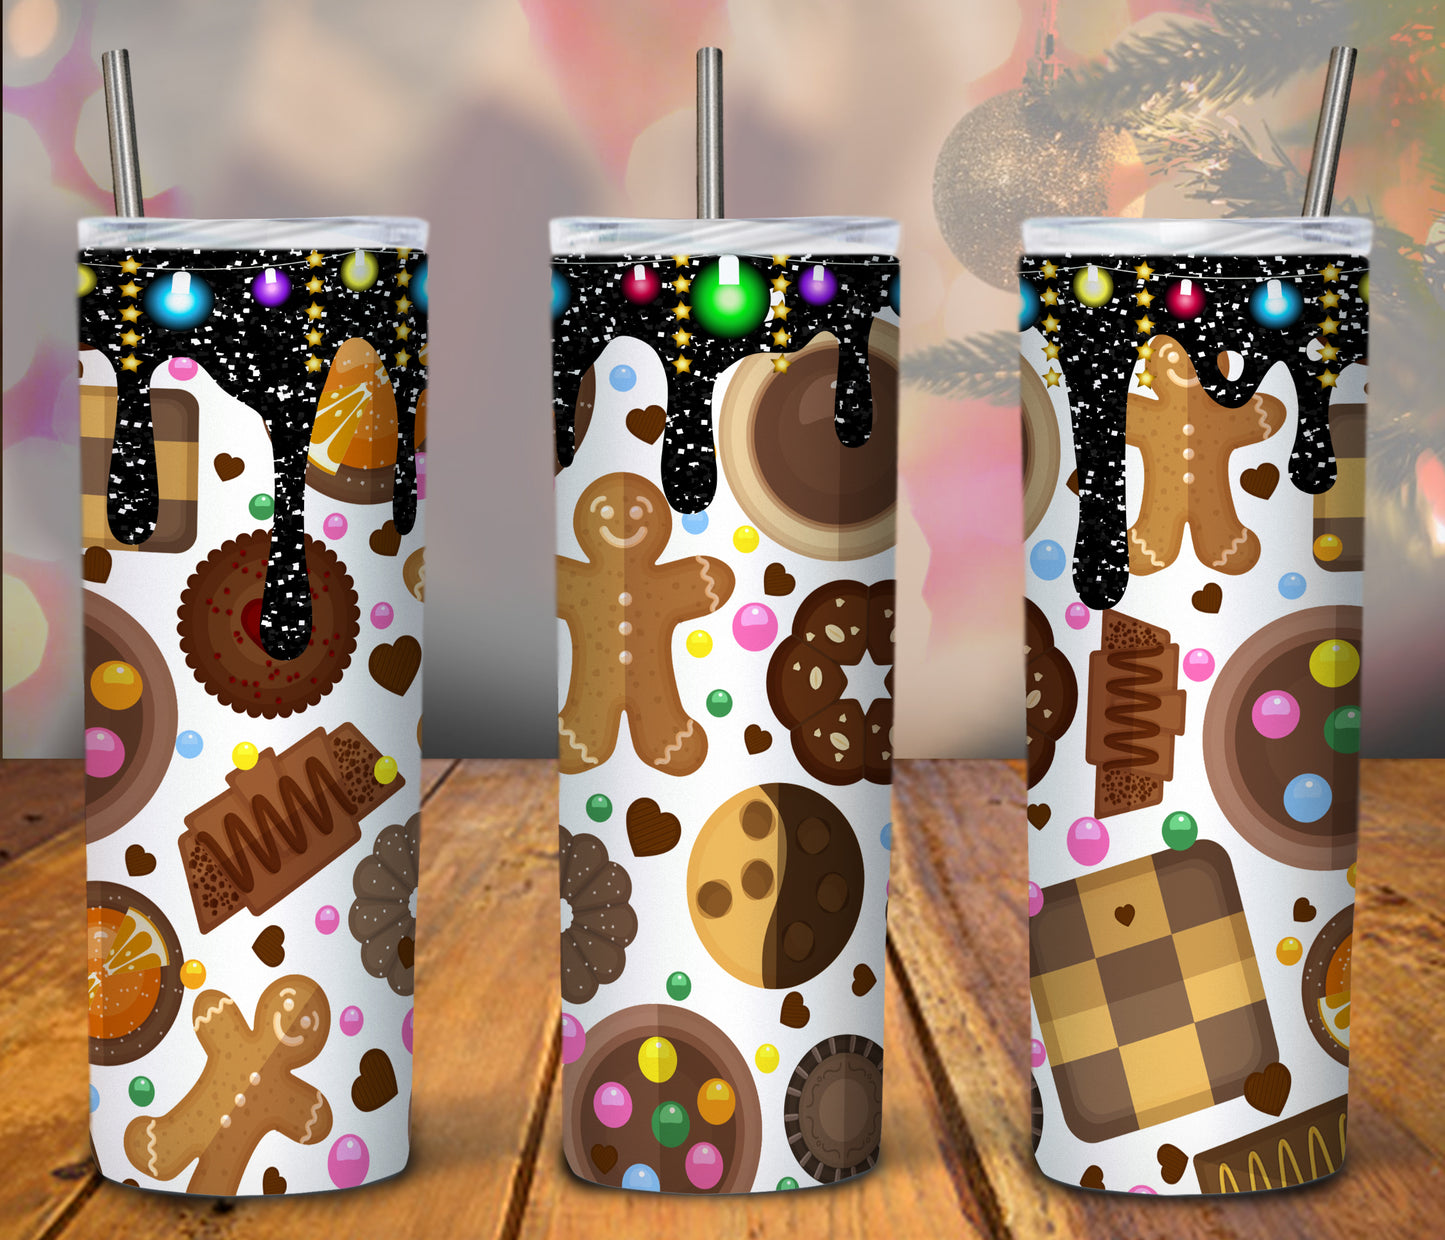 gingerbread snacks and treats pictured on tumbler 20 oz